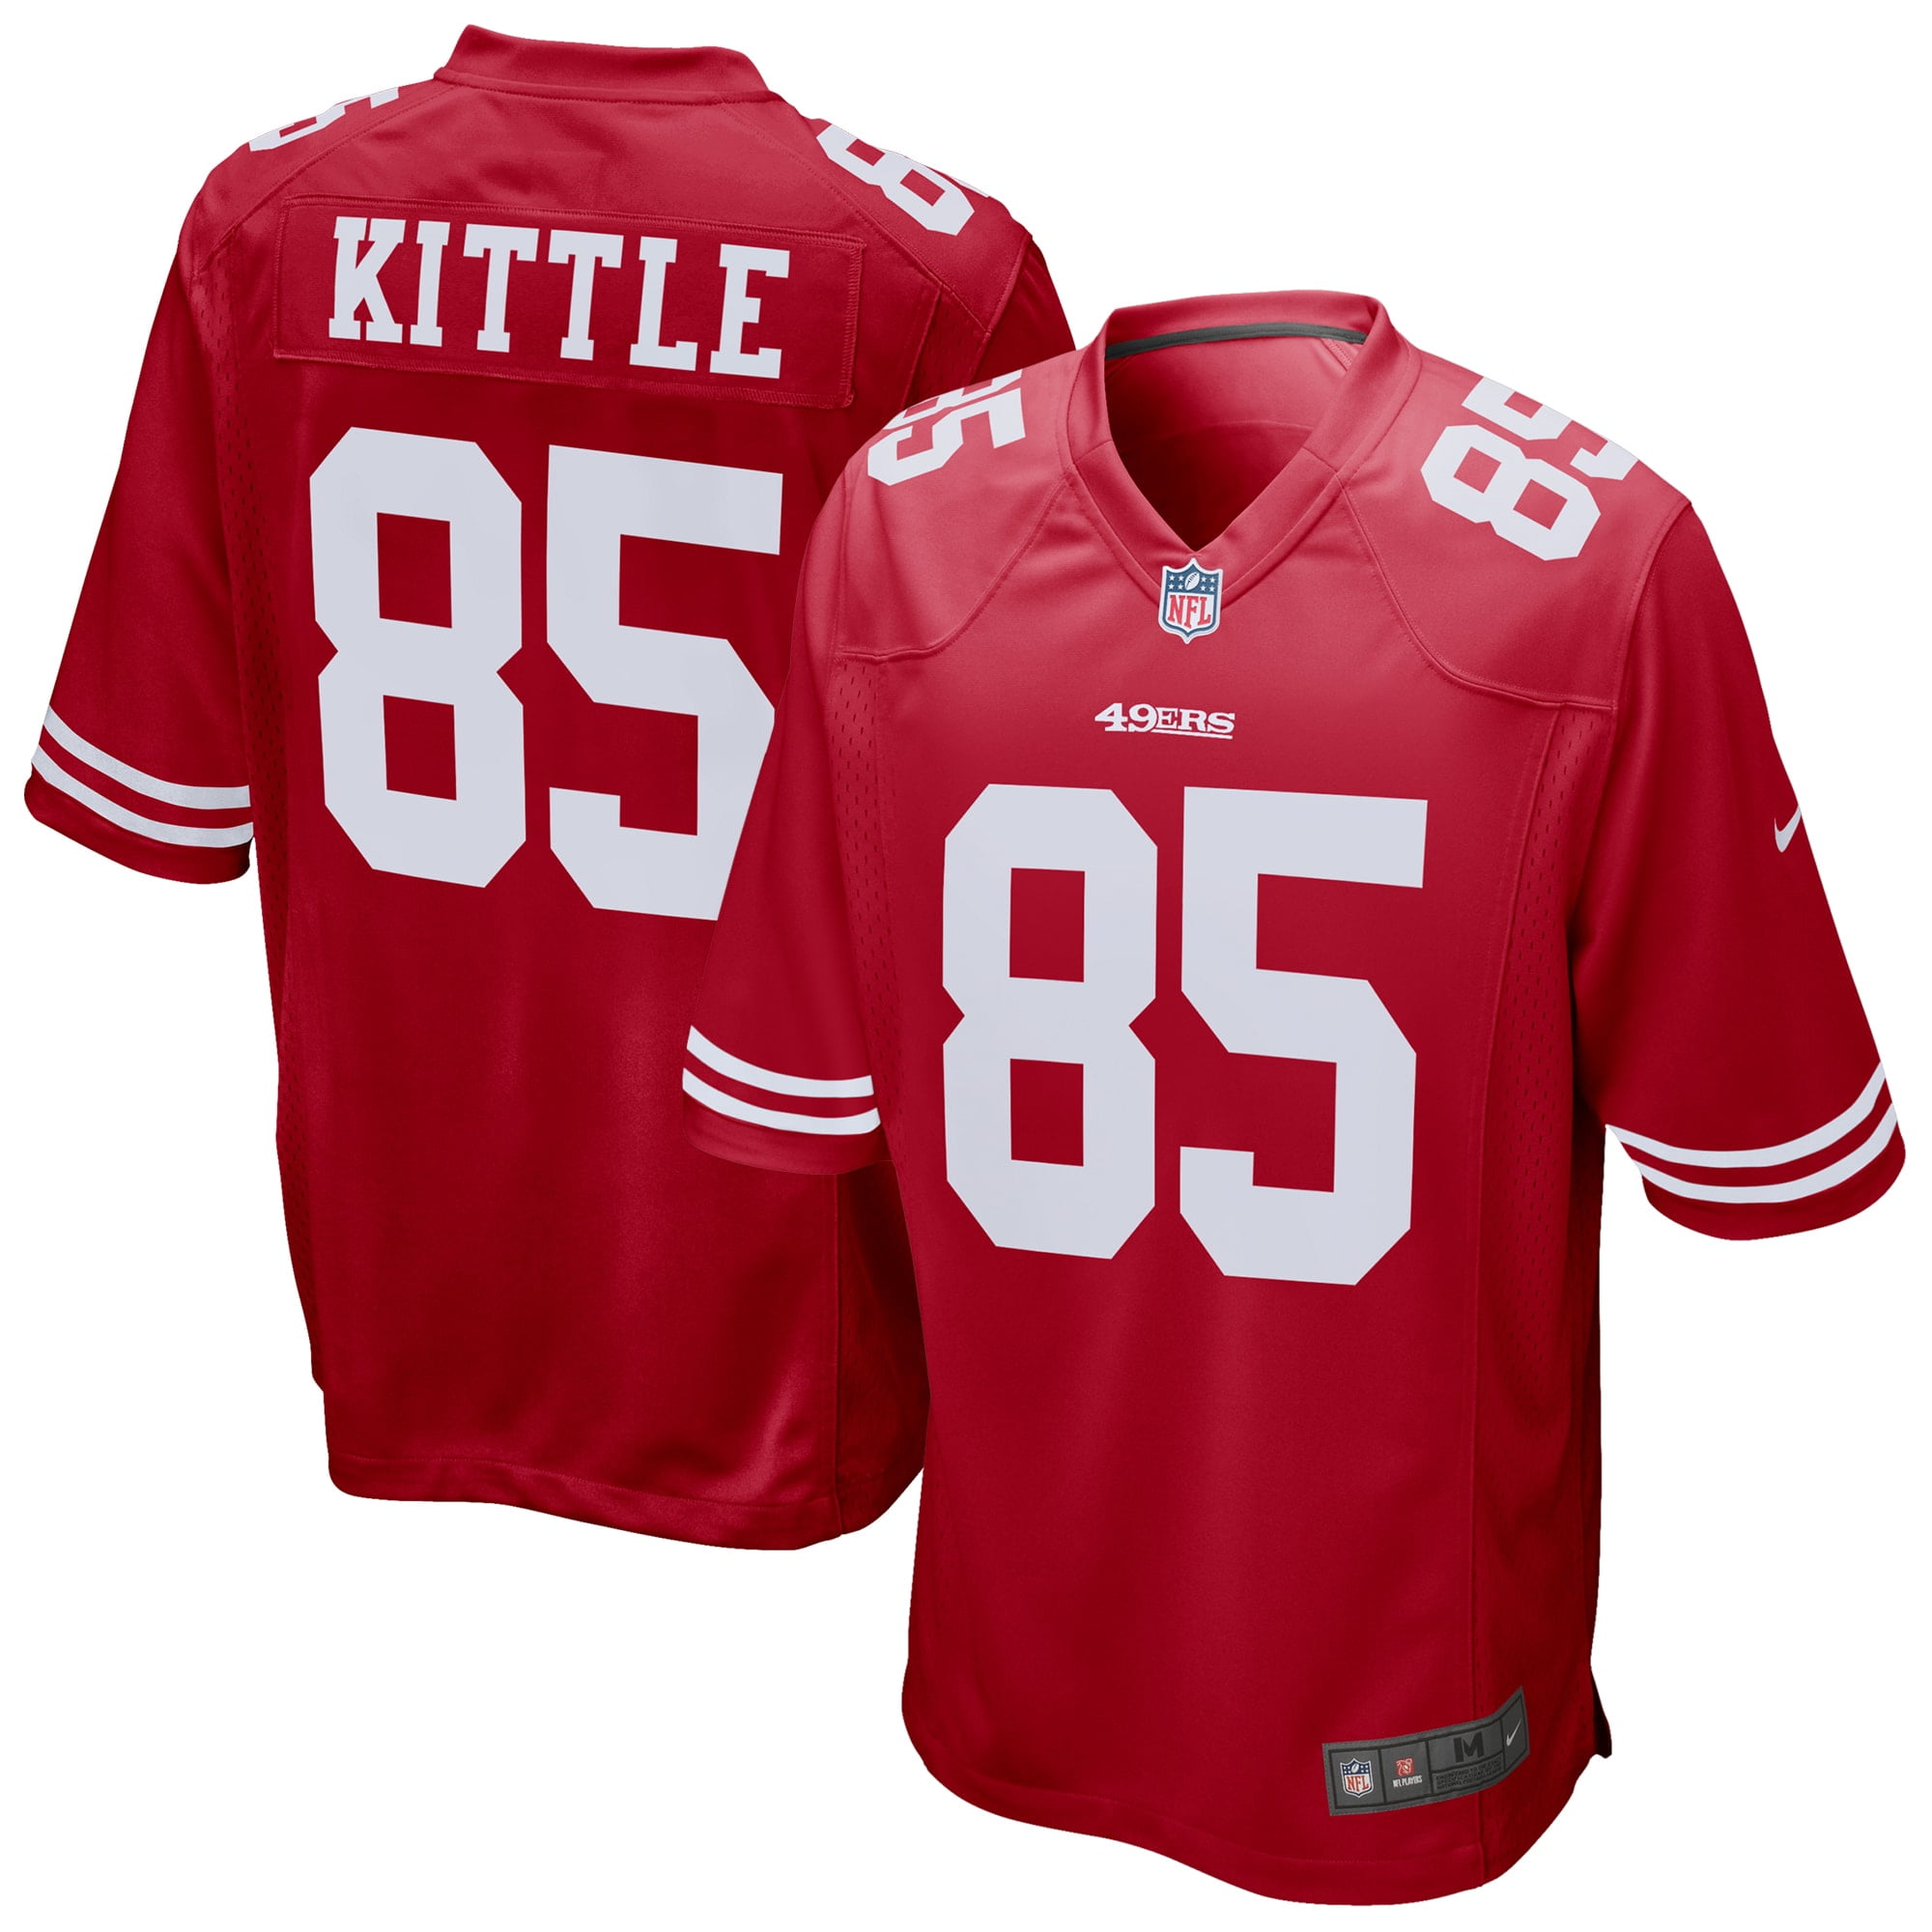 classic 49ers jersey